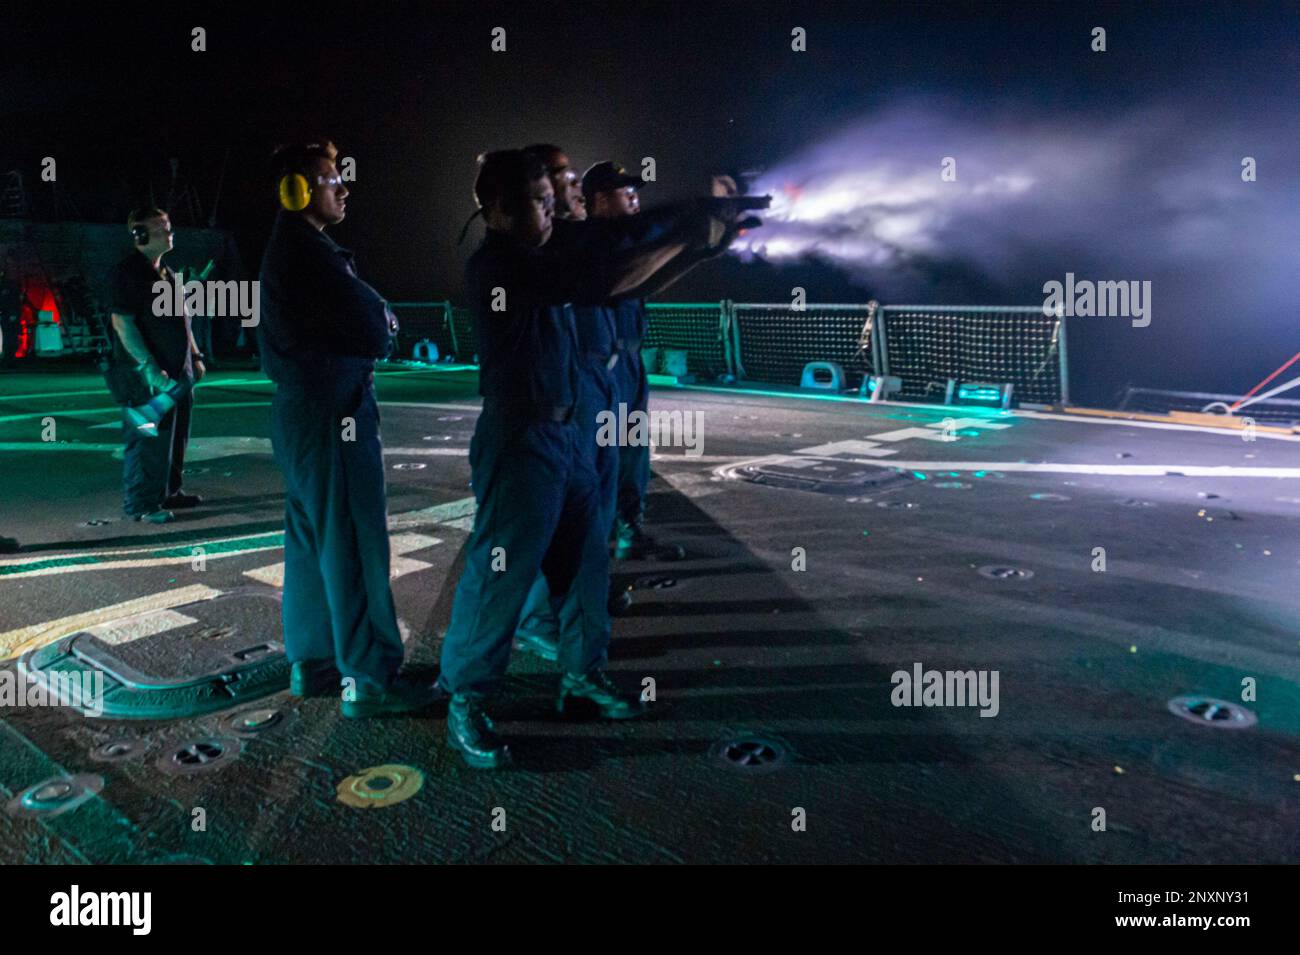 230123-N-NH267-2122 PACIFIC OCEAN (Jan. 23, 2023) U.S. Navy Intelligence Specialist 1st Class Roger Bajet, from San Diego, fires an M9 pistol during a low-light small arms fire on the flight deck of the Arleigh Burke-class guided-missile destroyer USS Paul Hamilton (DDG 60). Paul Hamilton, part of the Nimitz Carrier Strike Group, is underway conducting routine operations. Stock Photo